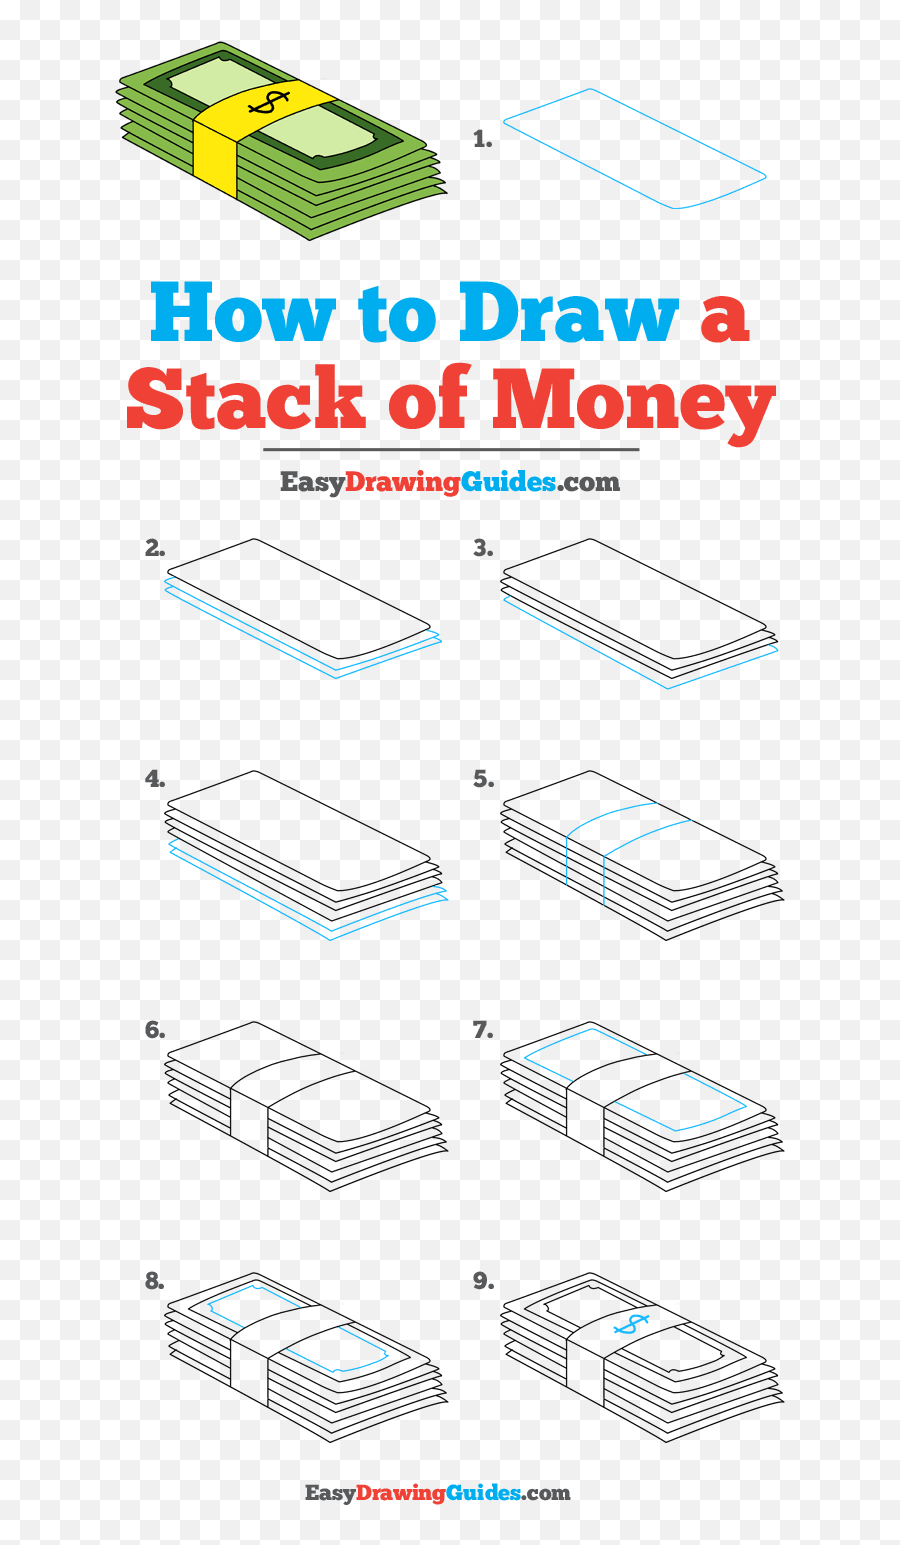 How To Draw A Stack Of Money - Really Easy Drawing Tutorial Dot Emoji,Pile Of Money Png